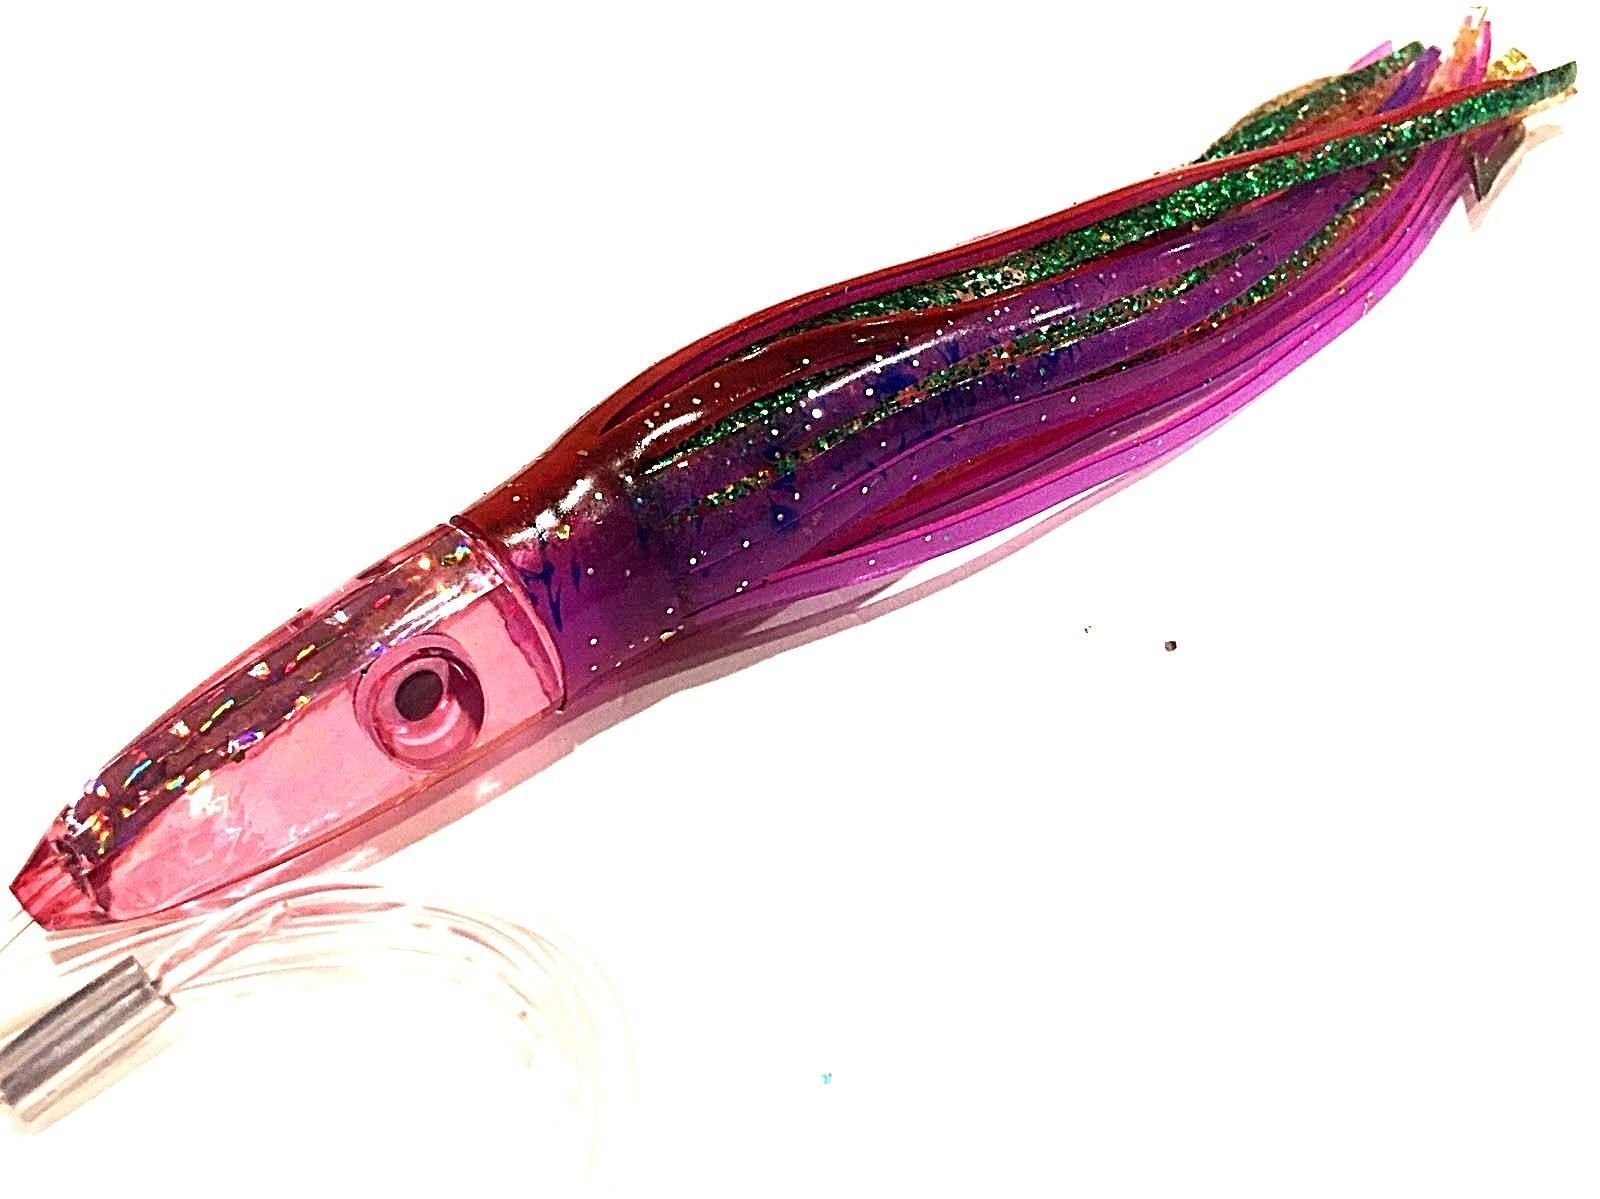 trolling lure heads off 61% 